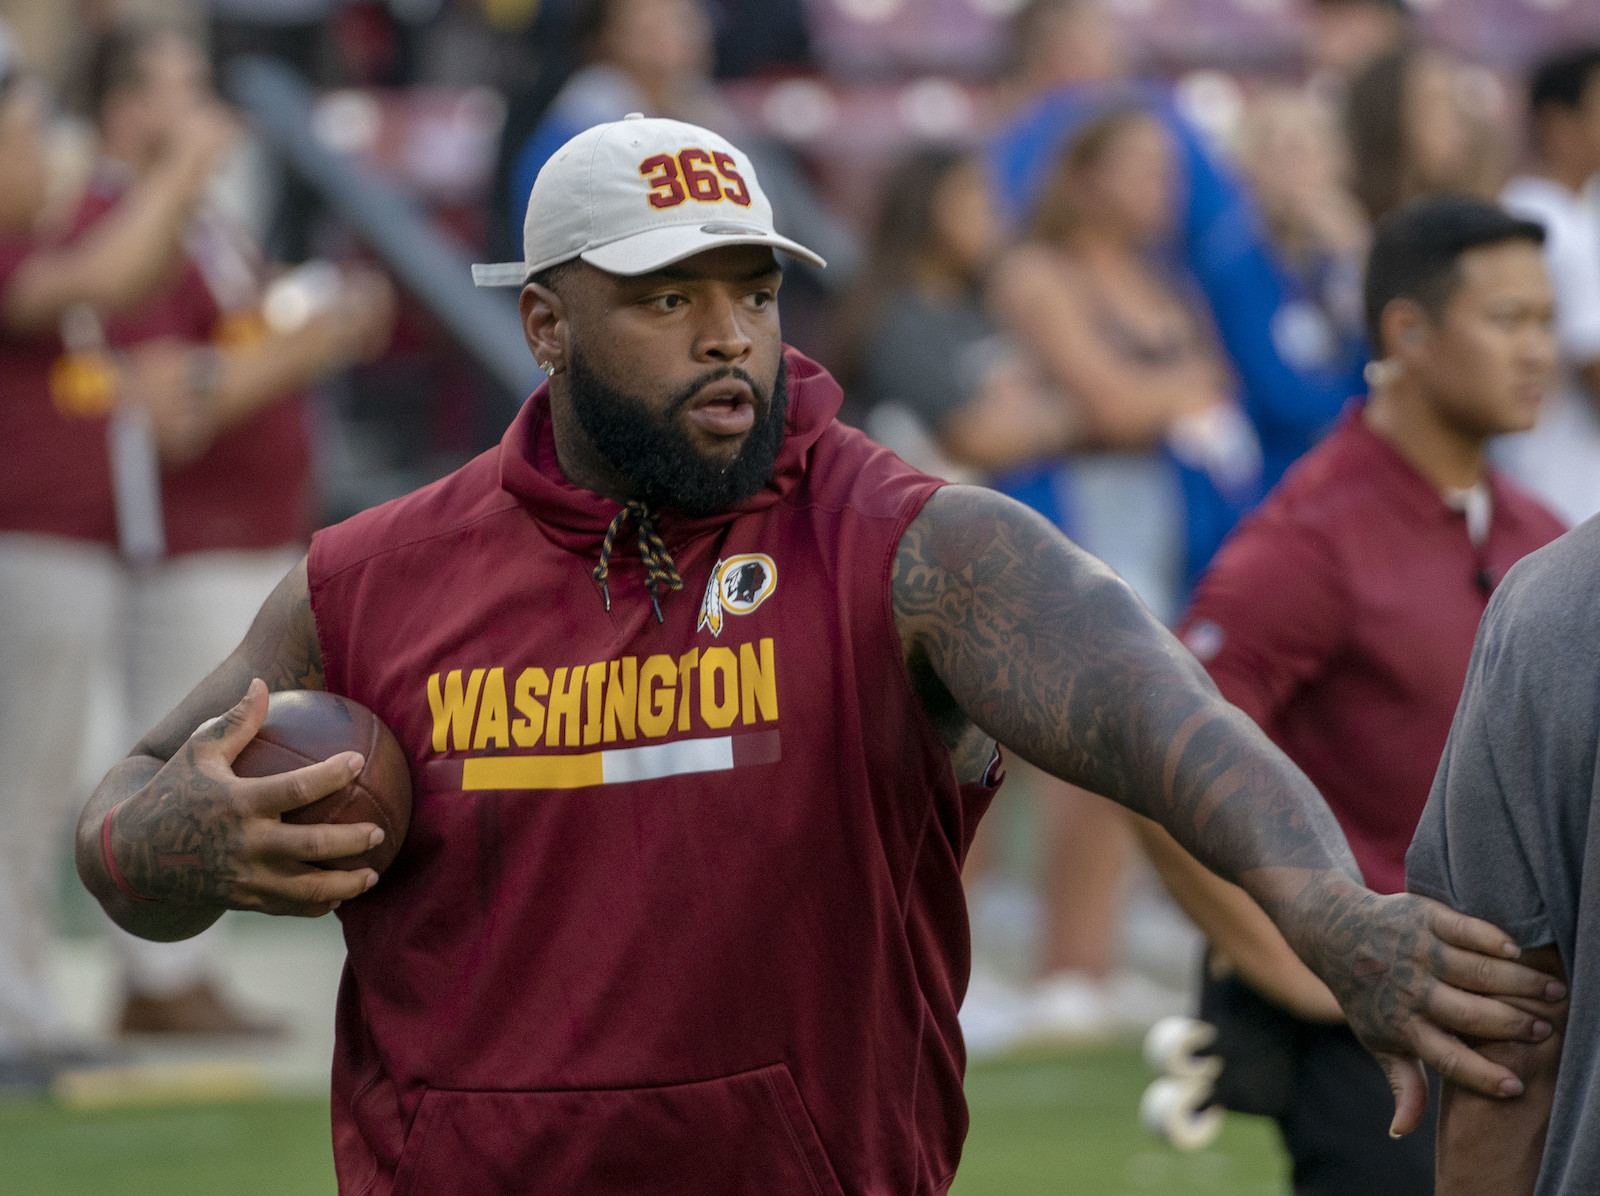 NFL Draft Day 3: 49ers Acquire Trent Williams, Trade Breida and Goodwin